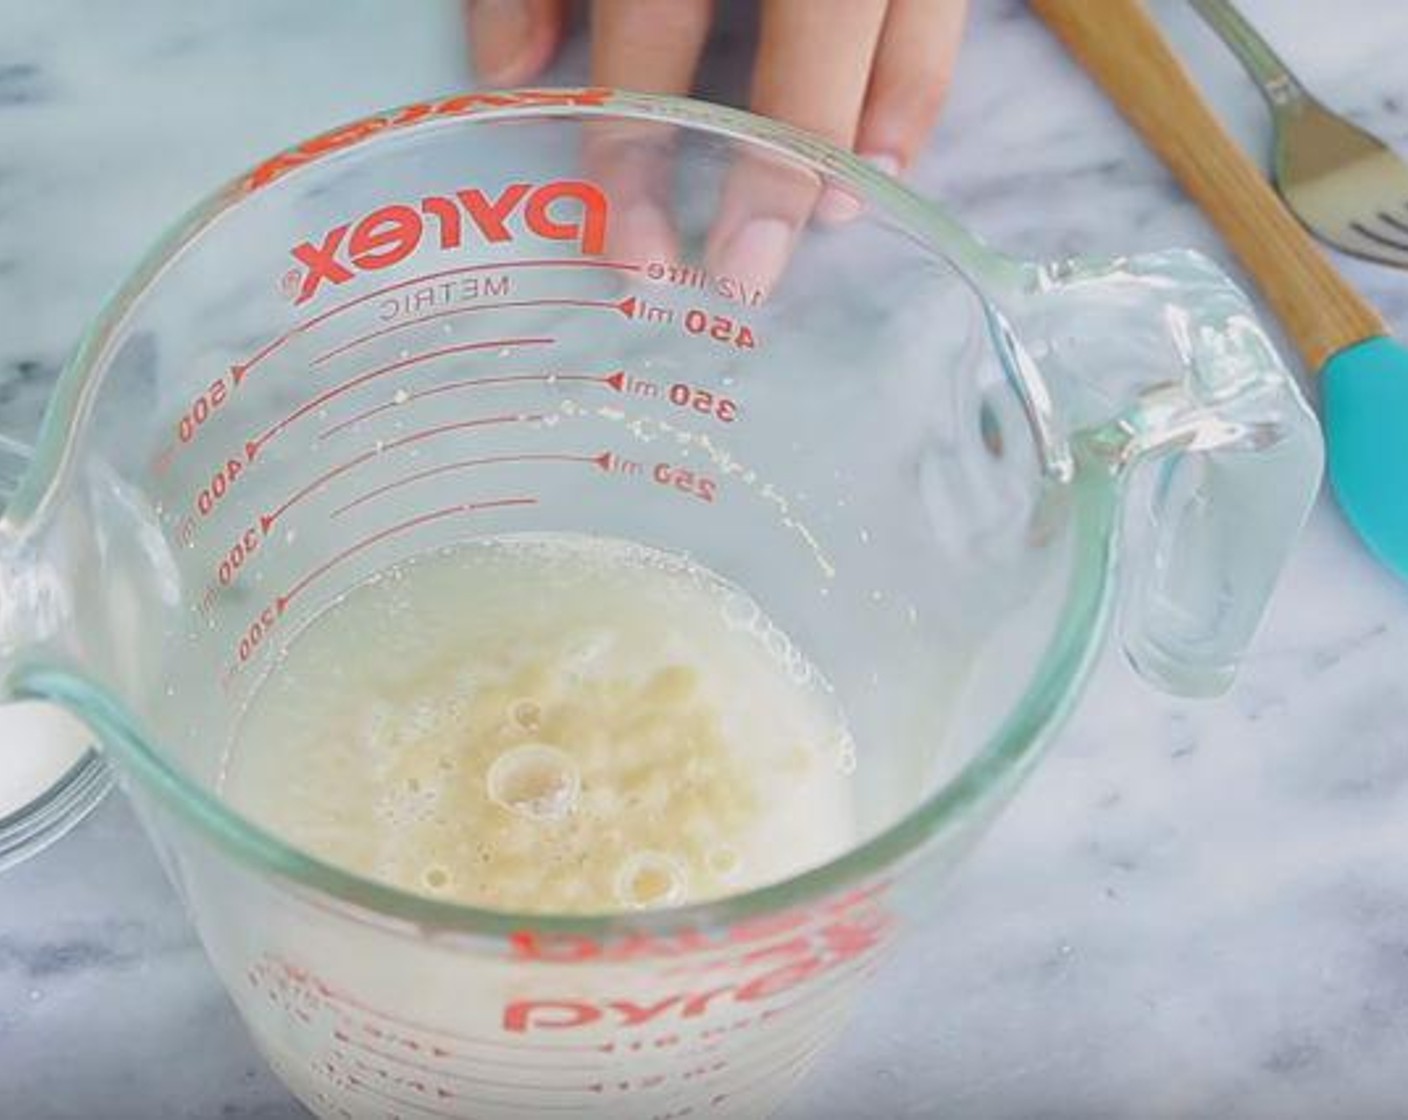 step 1 In a container, mix the Water (2/3 cup), Active Dry Yeast (1 tsp), and Granulated Sugar (1 Tbsp). Mix and let sit for 10 minutes.